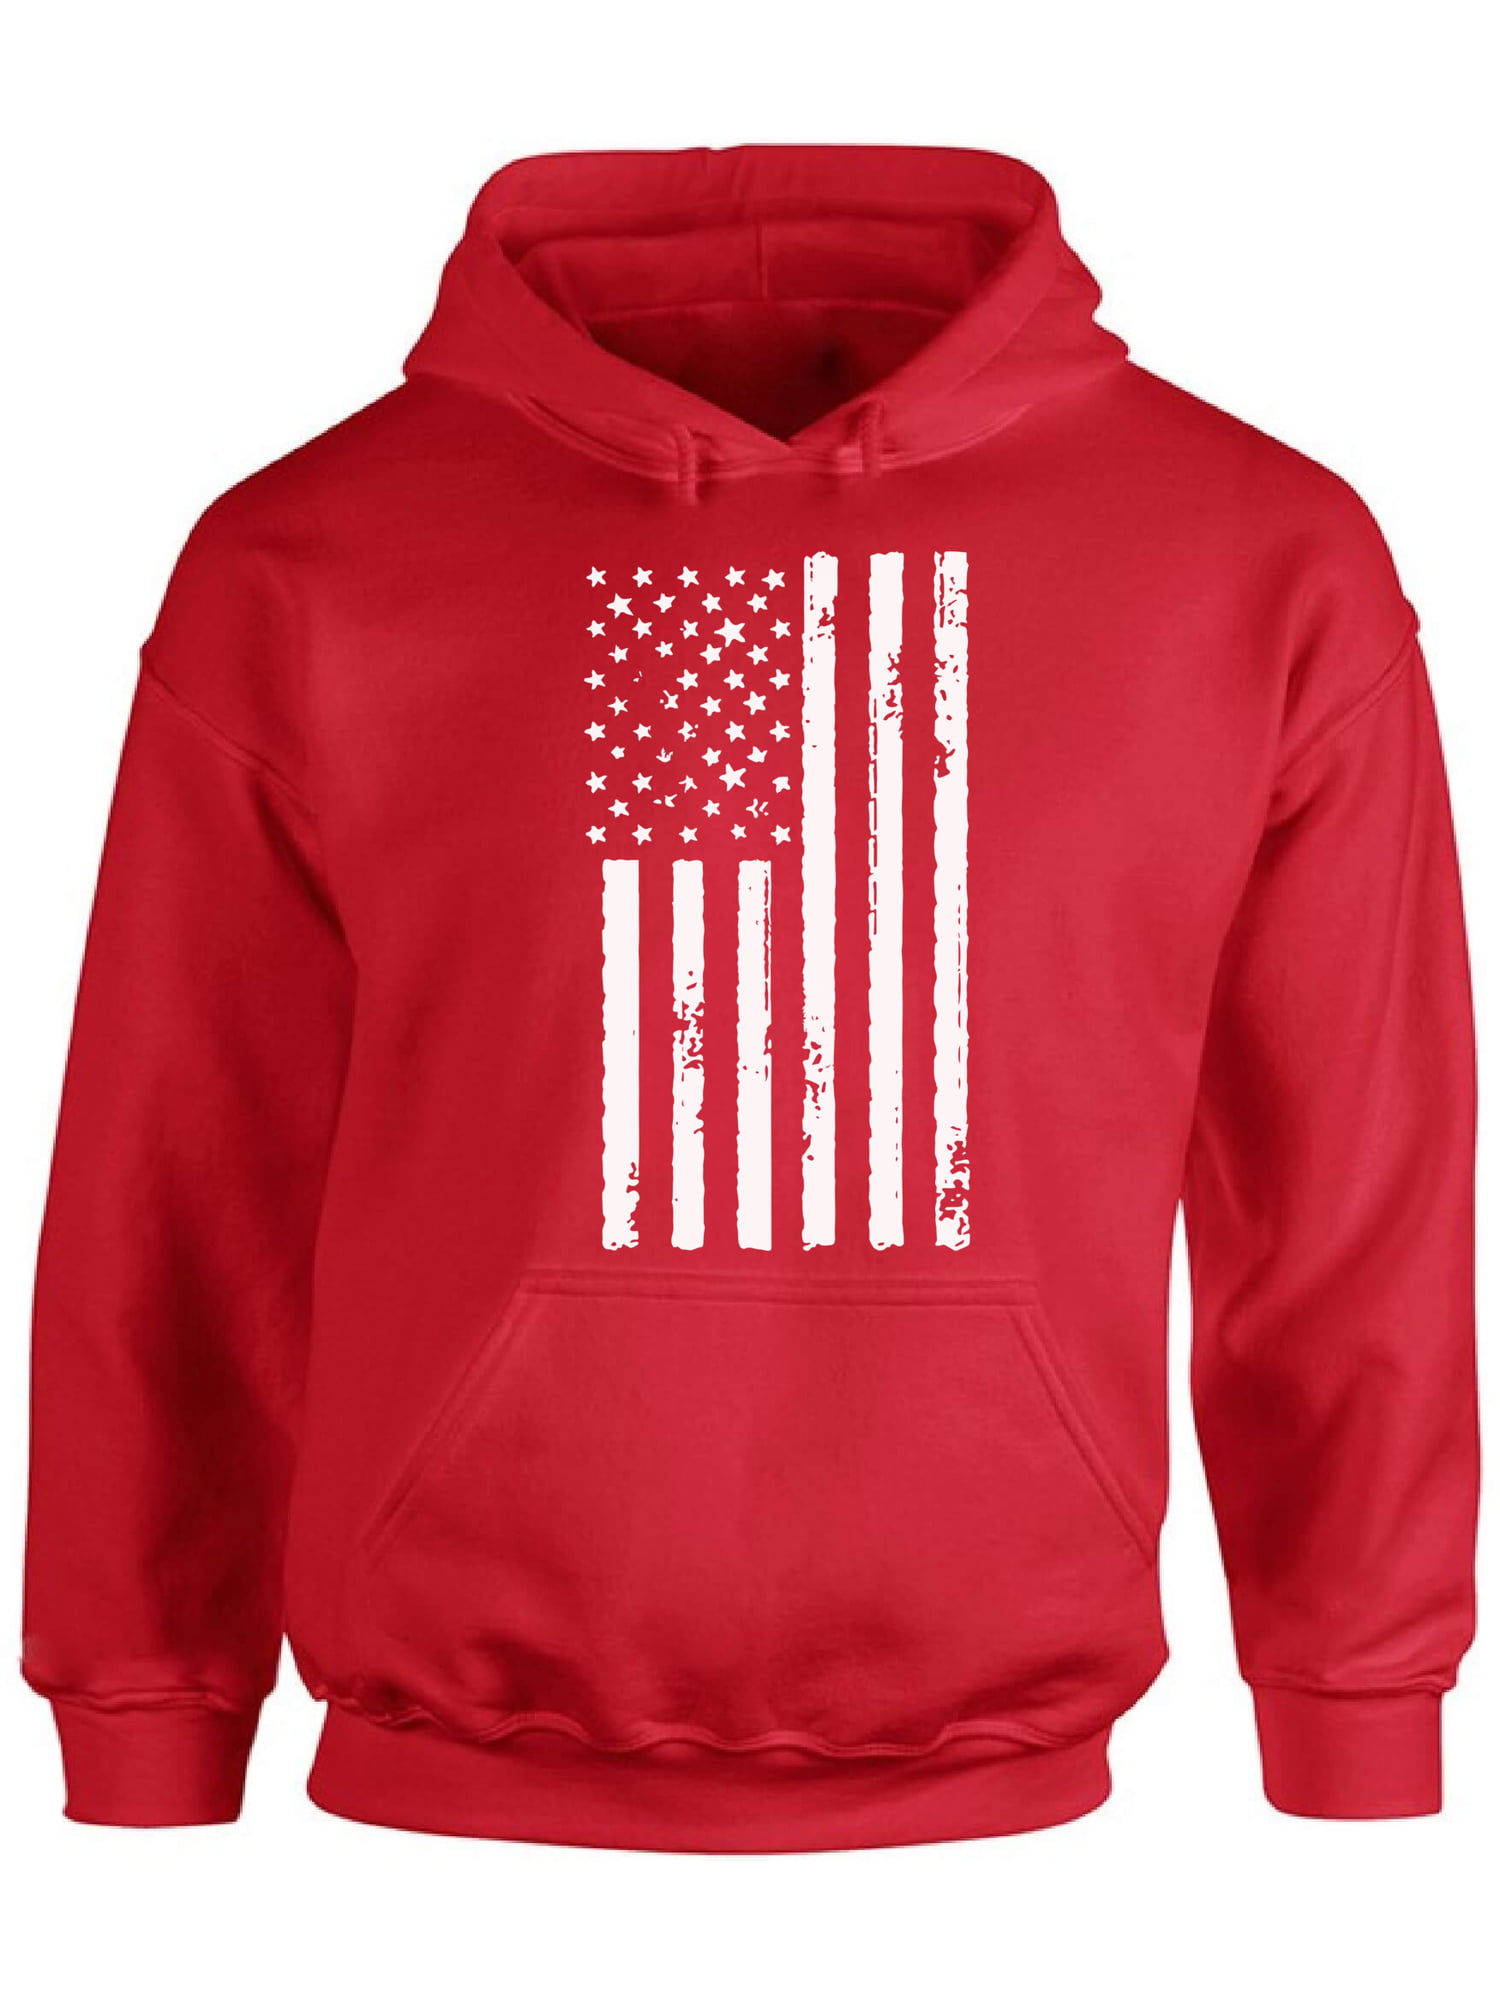 Awkward Styles Unisex USA Flag Patriotic Hoodie Hooded Sweatshirt White Independence Day 4th of July 